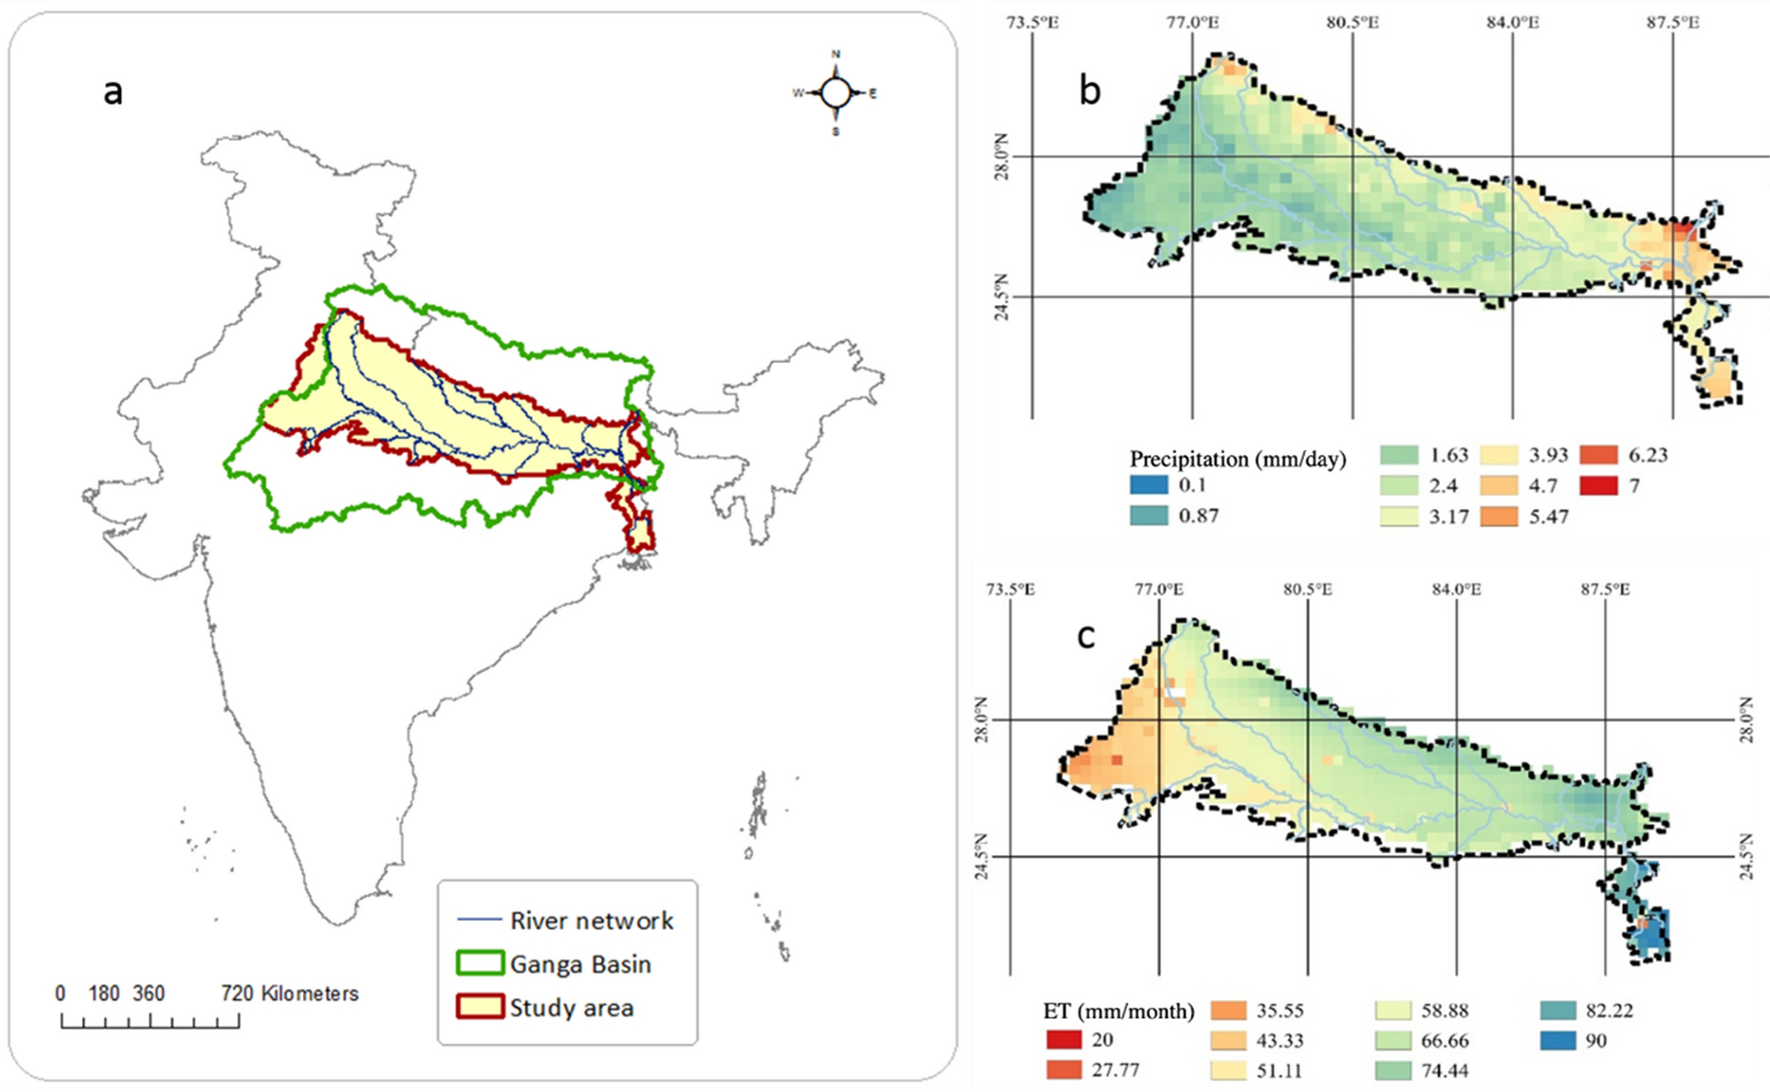 Estimation of groundwater storage loss for the Indian Ganga Basin